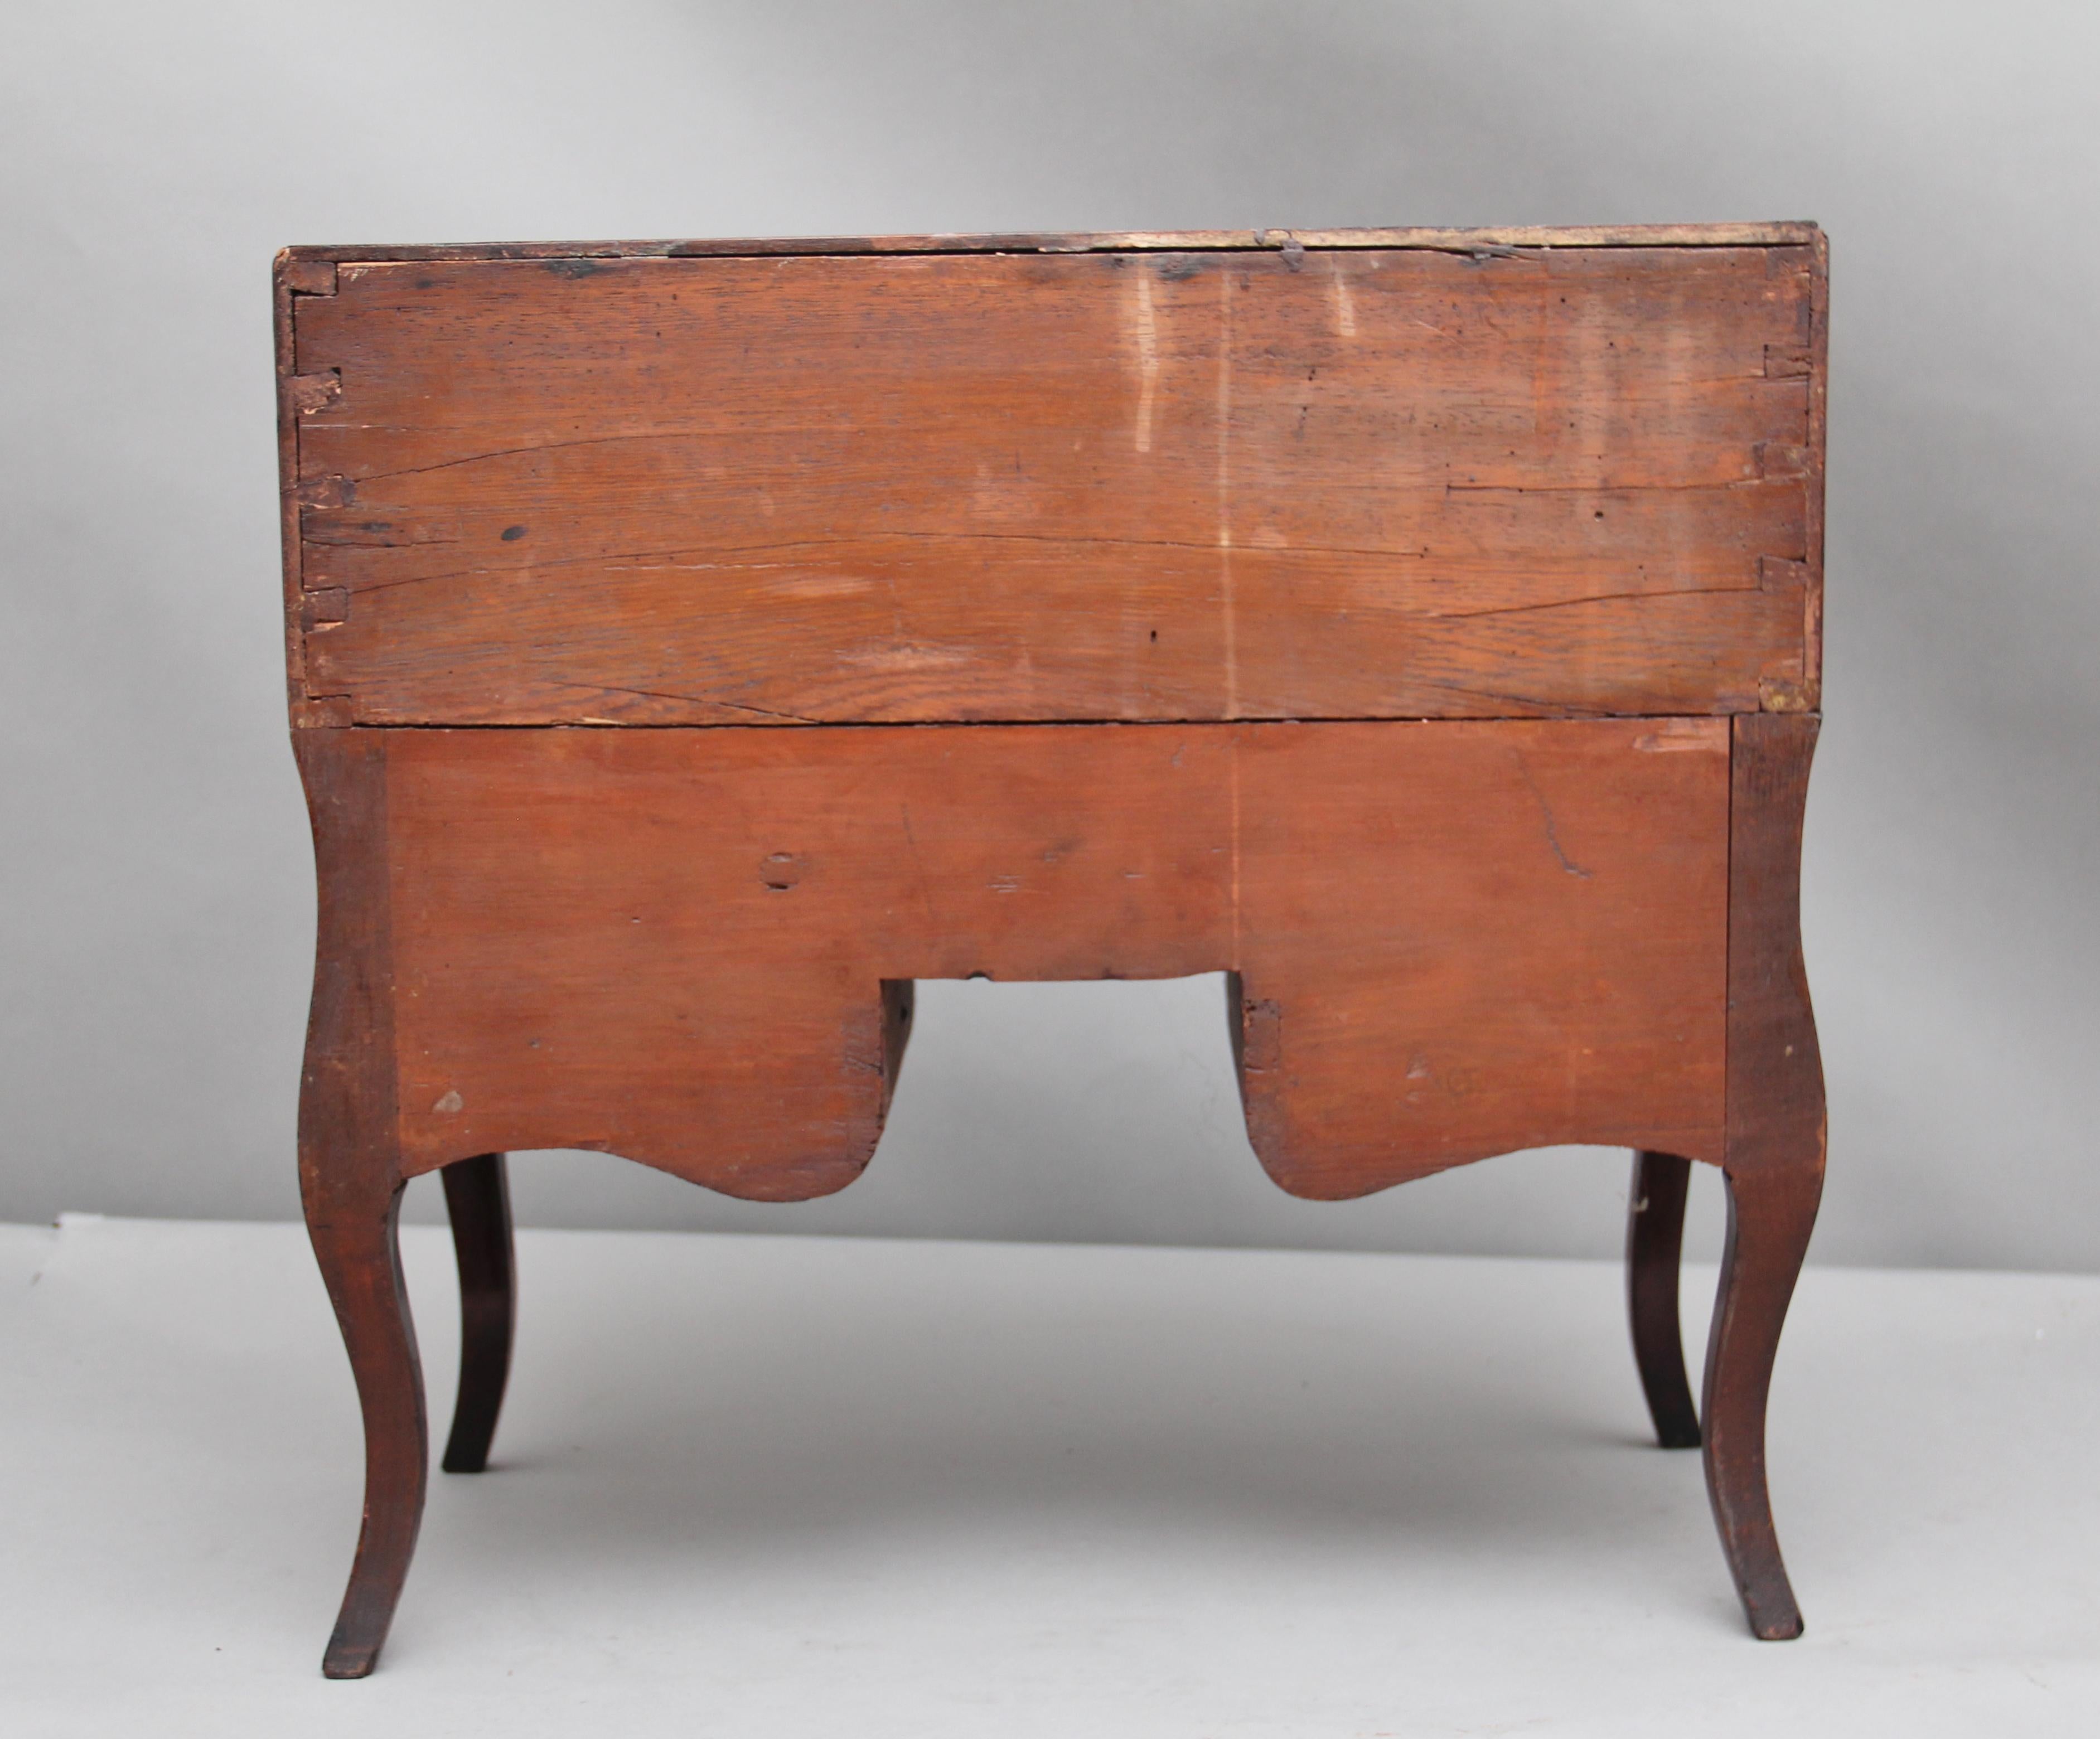 Early 19th Century 19th Century Parquetry Miniature Desk